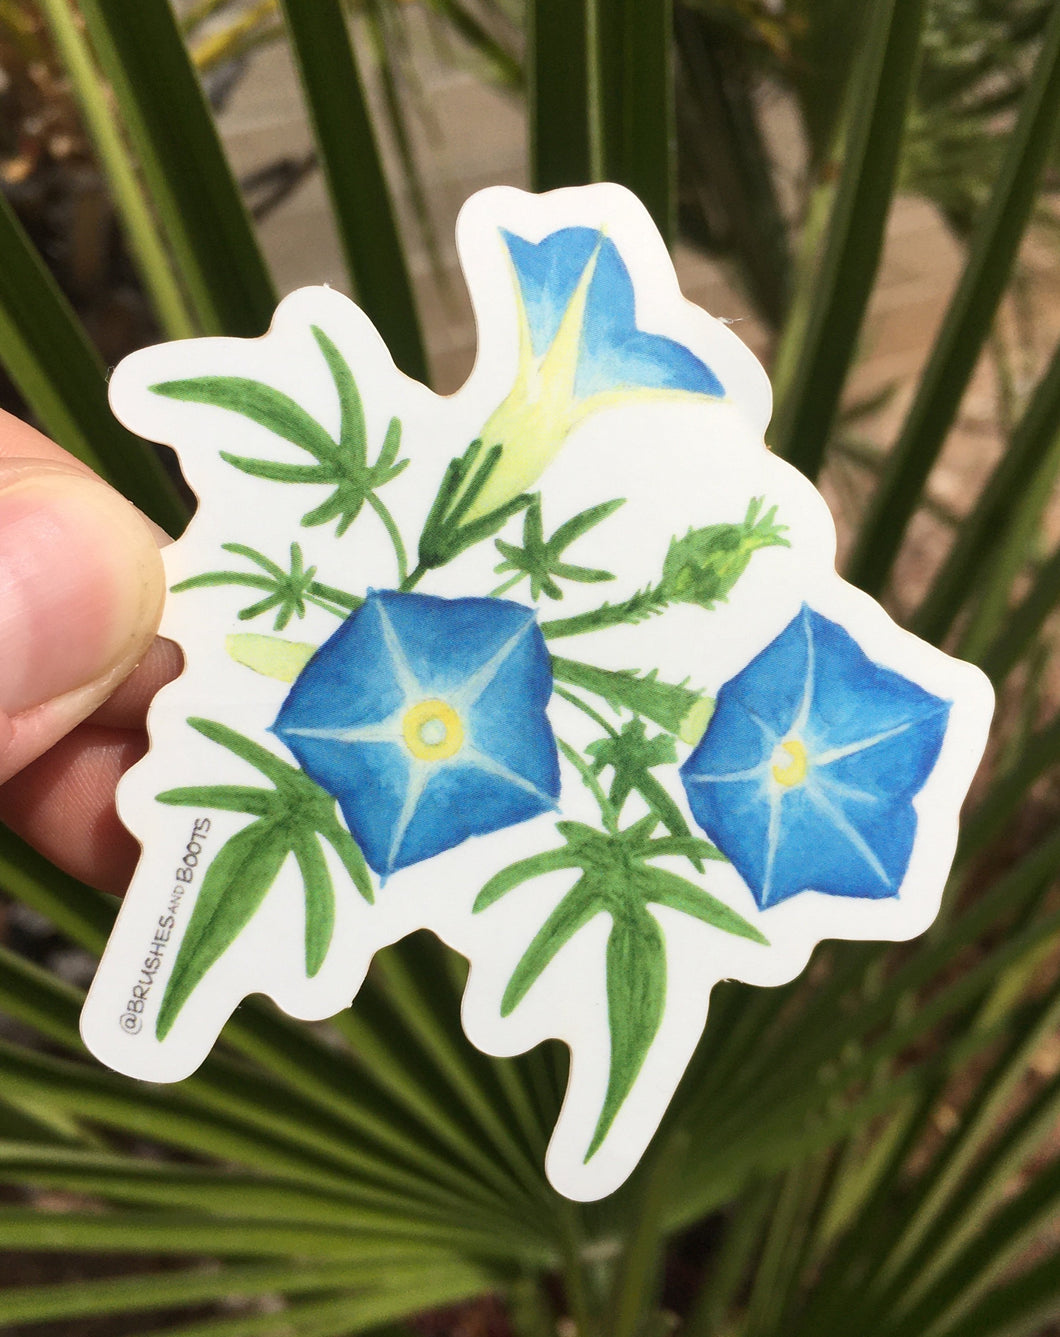 Vinyl sticker of Brushes and Boot's Canyon Morning Glory design - a blue flower found in canyons in the Sonoran Desert